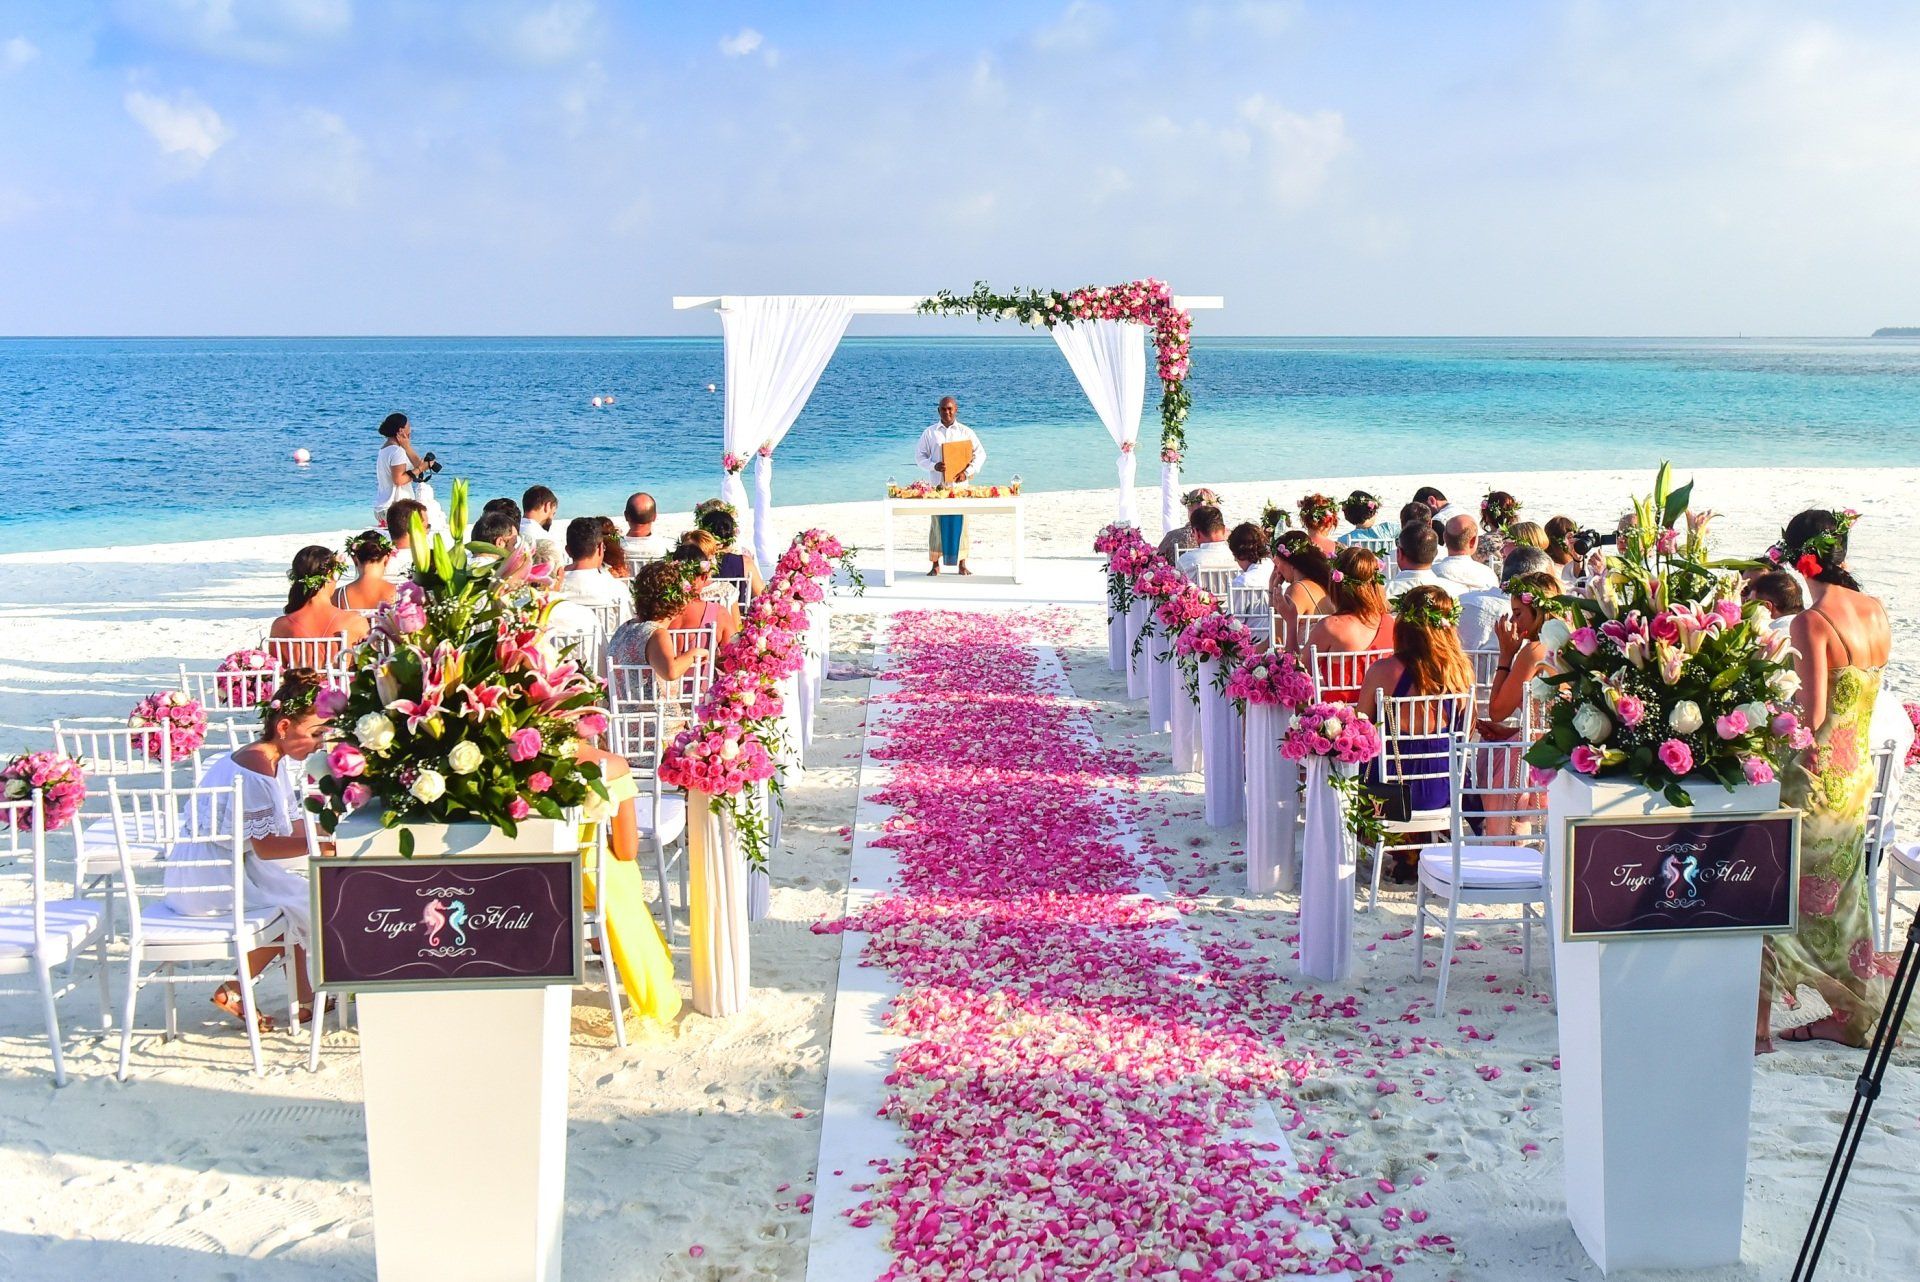 Outside wedding at the beach with pink rose petals on a walkway